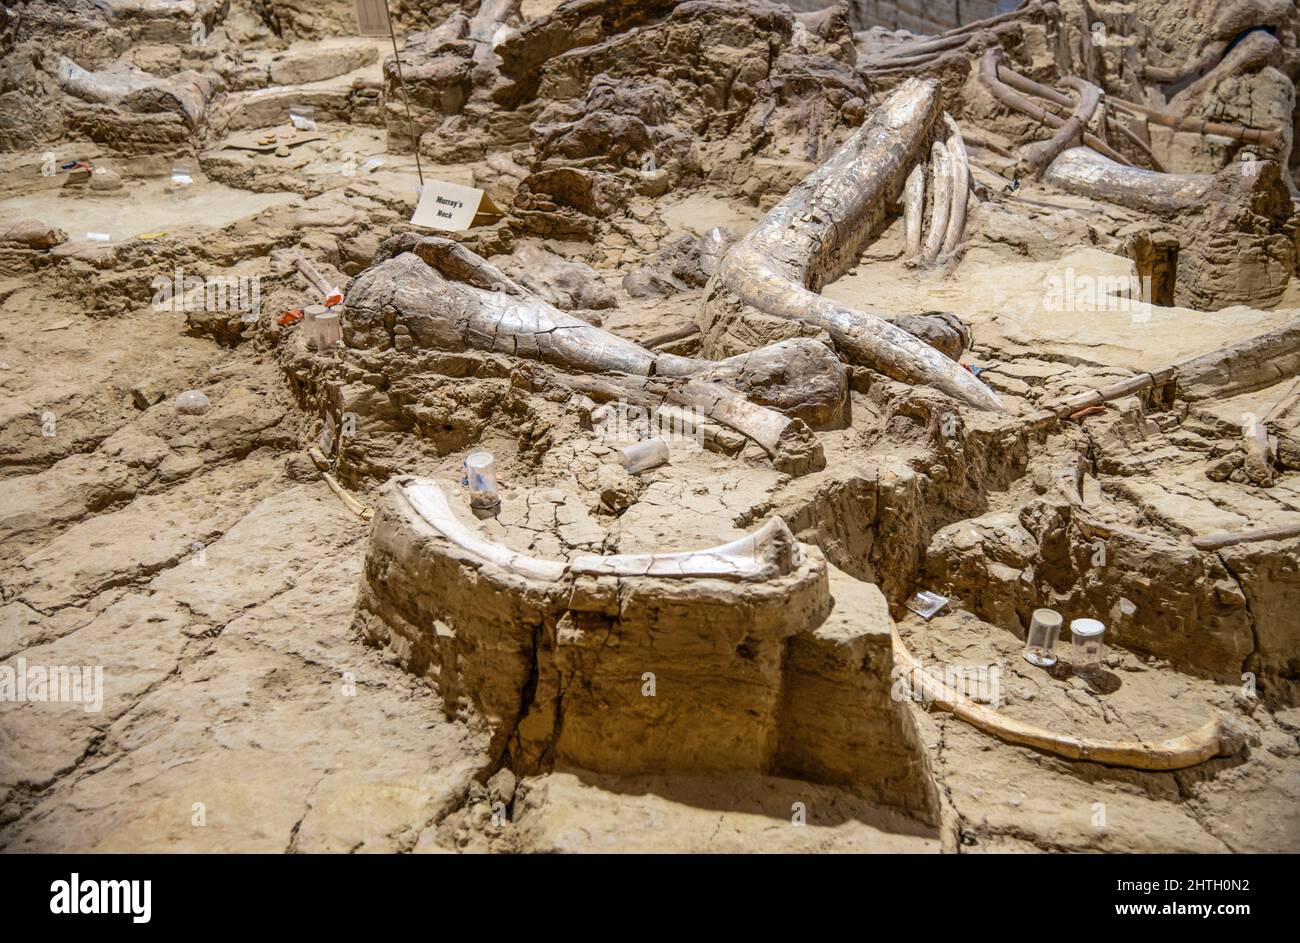 active dig site of sink hole dating from the Pleistocene era containg fossil bones of mammoth in Hot Springs, South Dakota Stock Photo